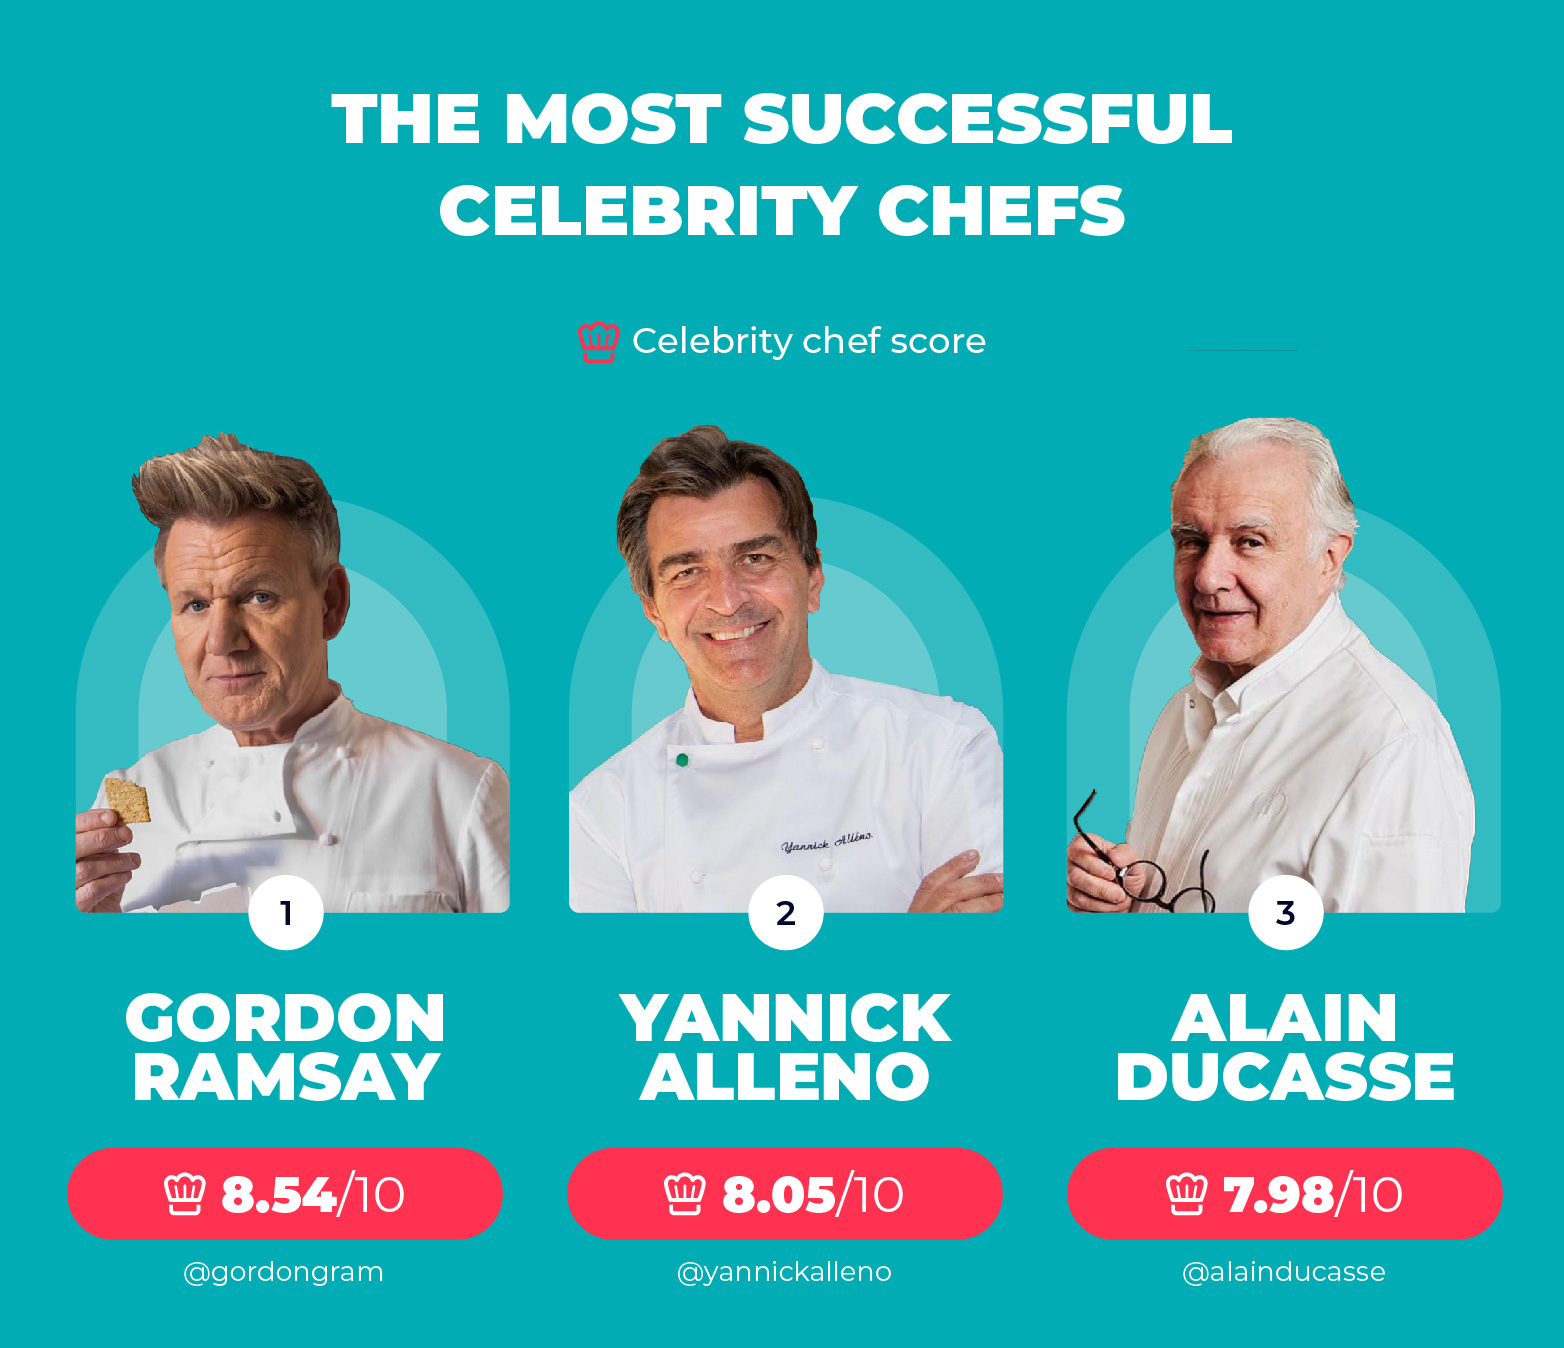 Top 3 Most Successful Celebrity Chefs